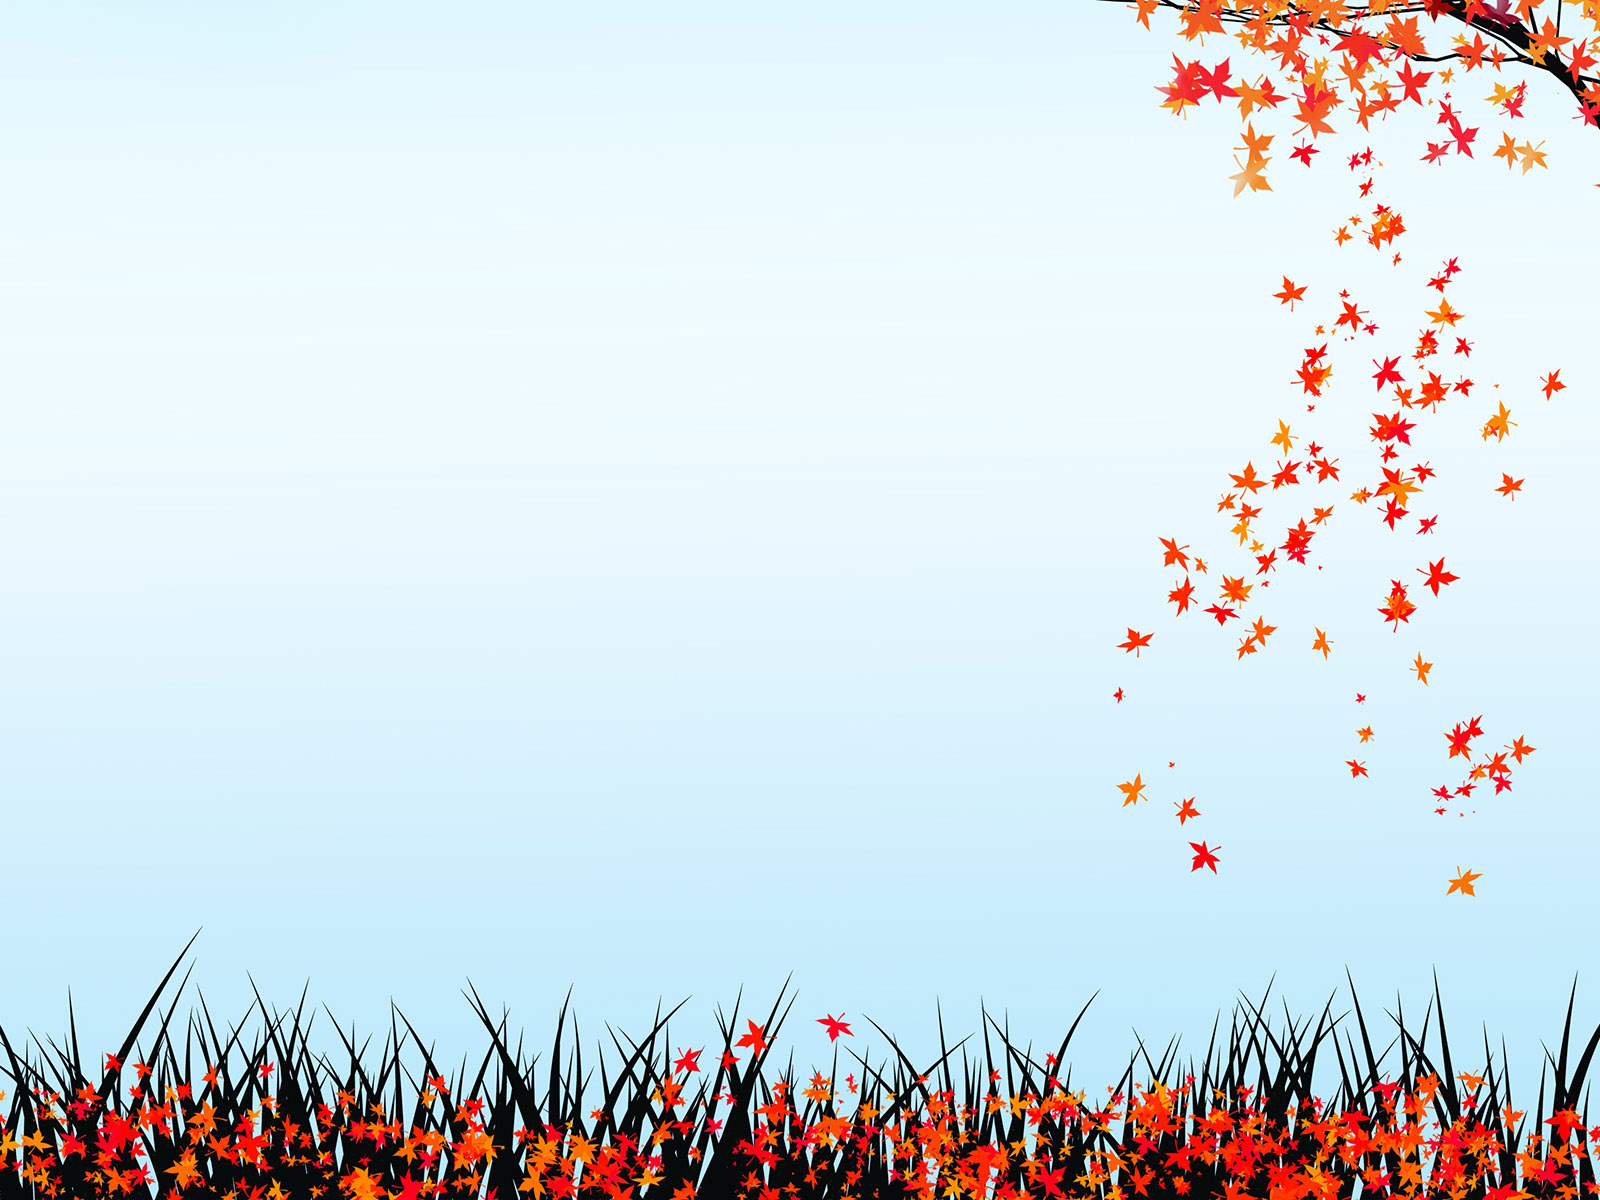 Autumn Nature Backgrounds Holiday, Nature Templates Free PPT